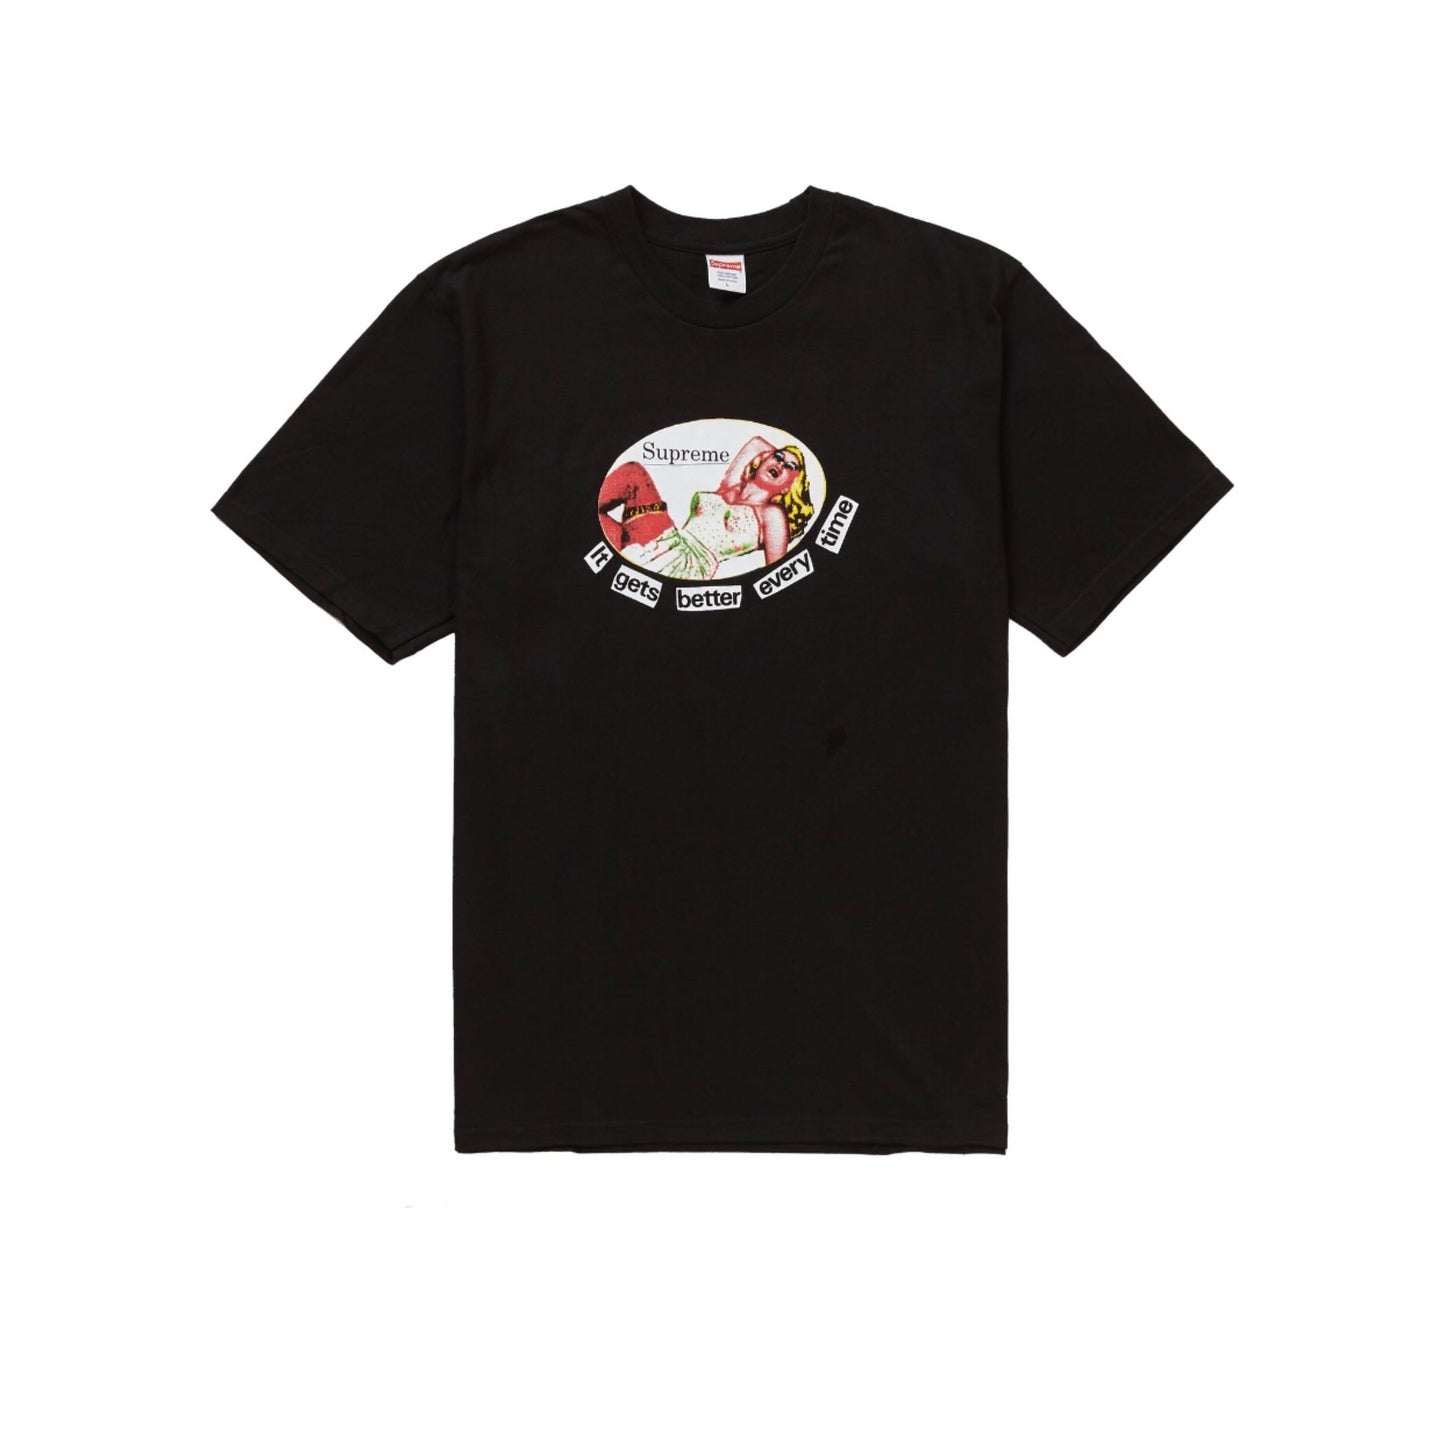 Supreme it gets better every time tee black - Centrall Online